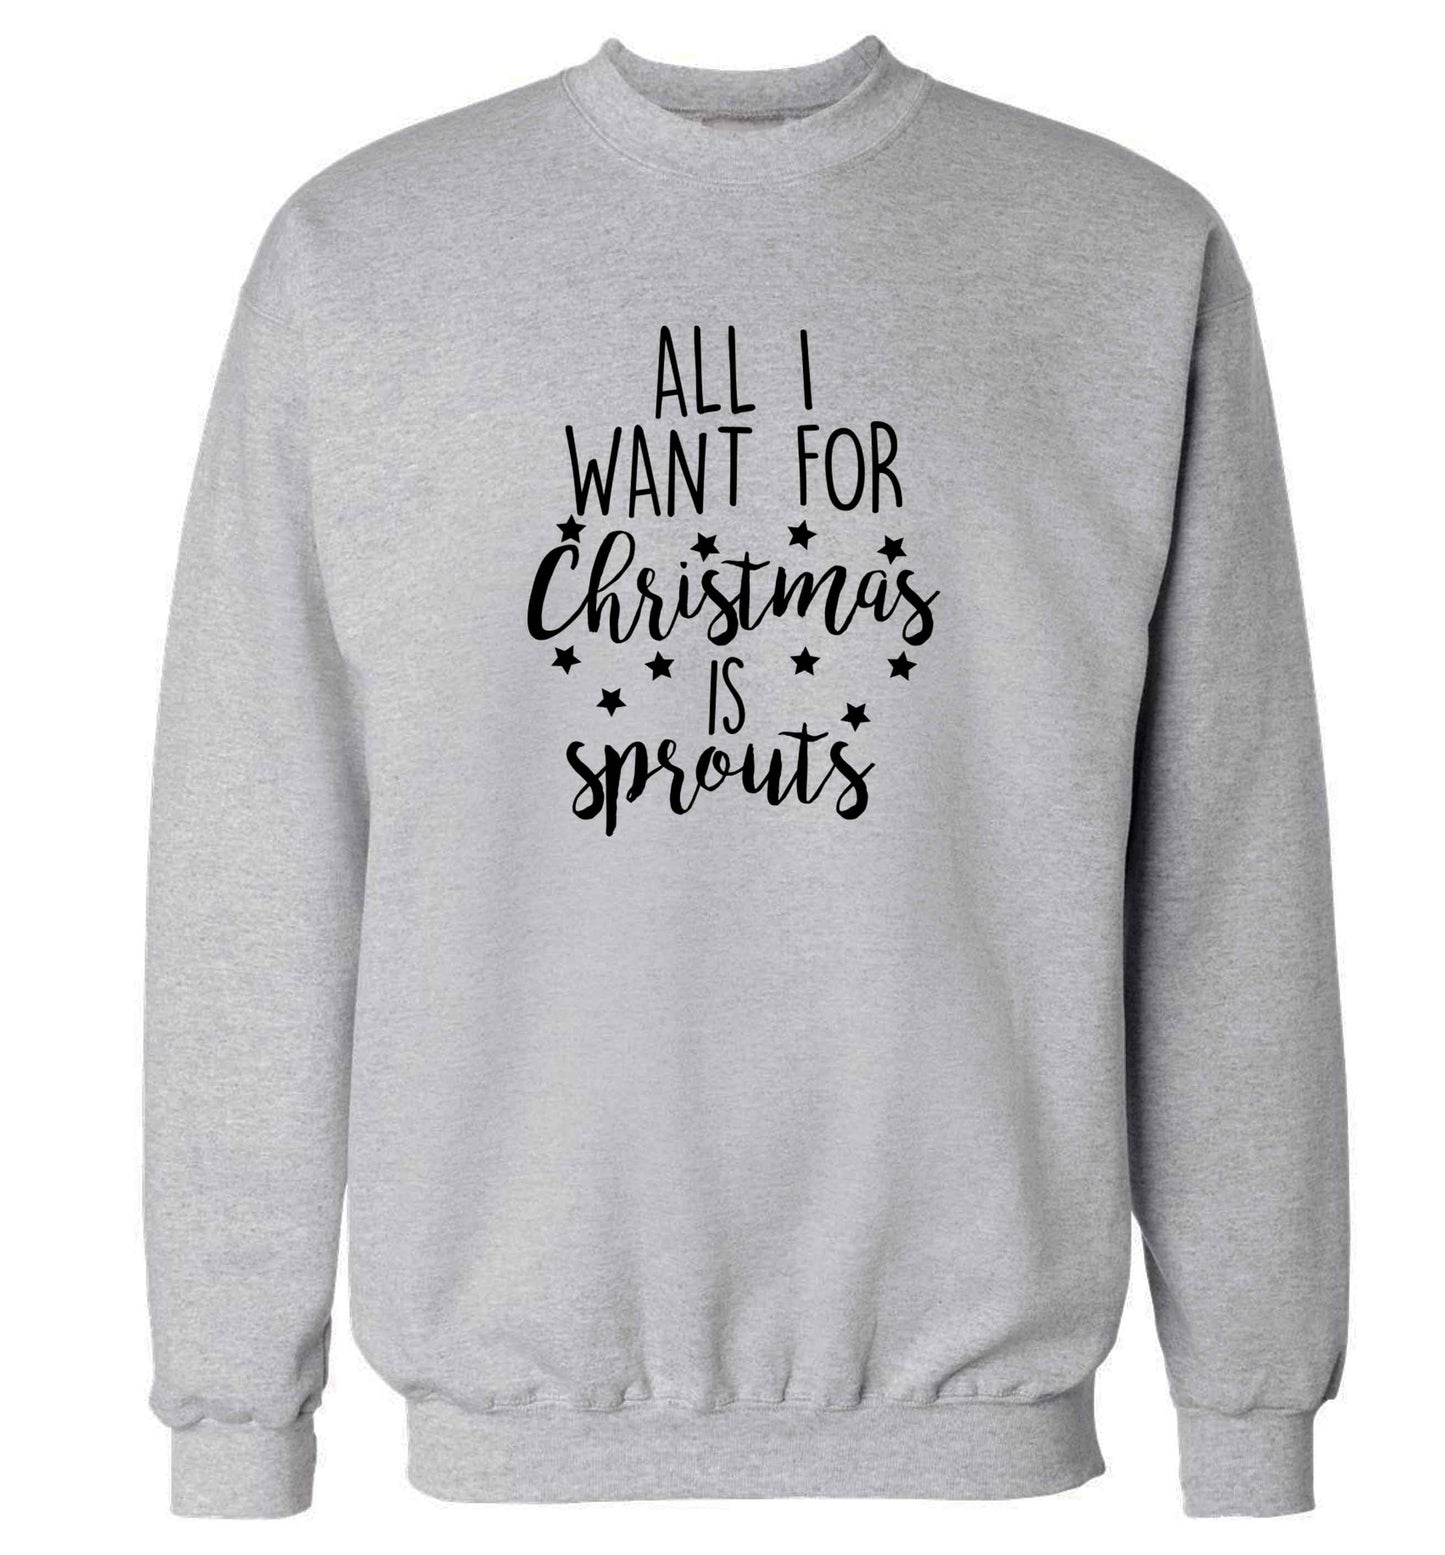 All I want for Christmas is sprouts adult's unisex grey sweater 2XL